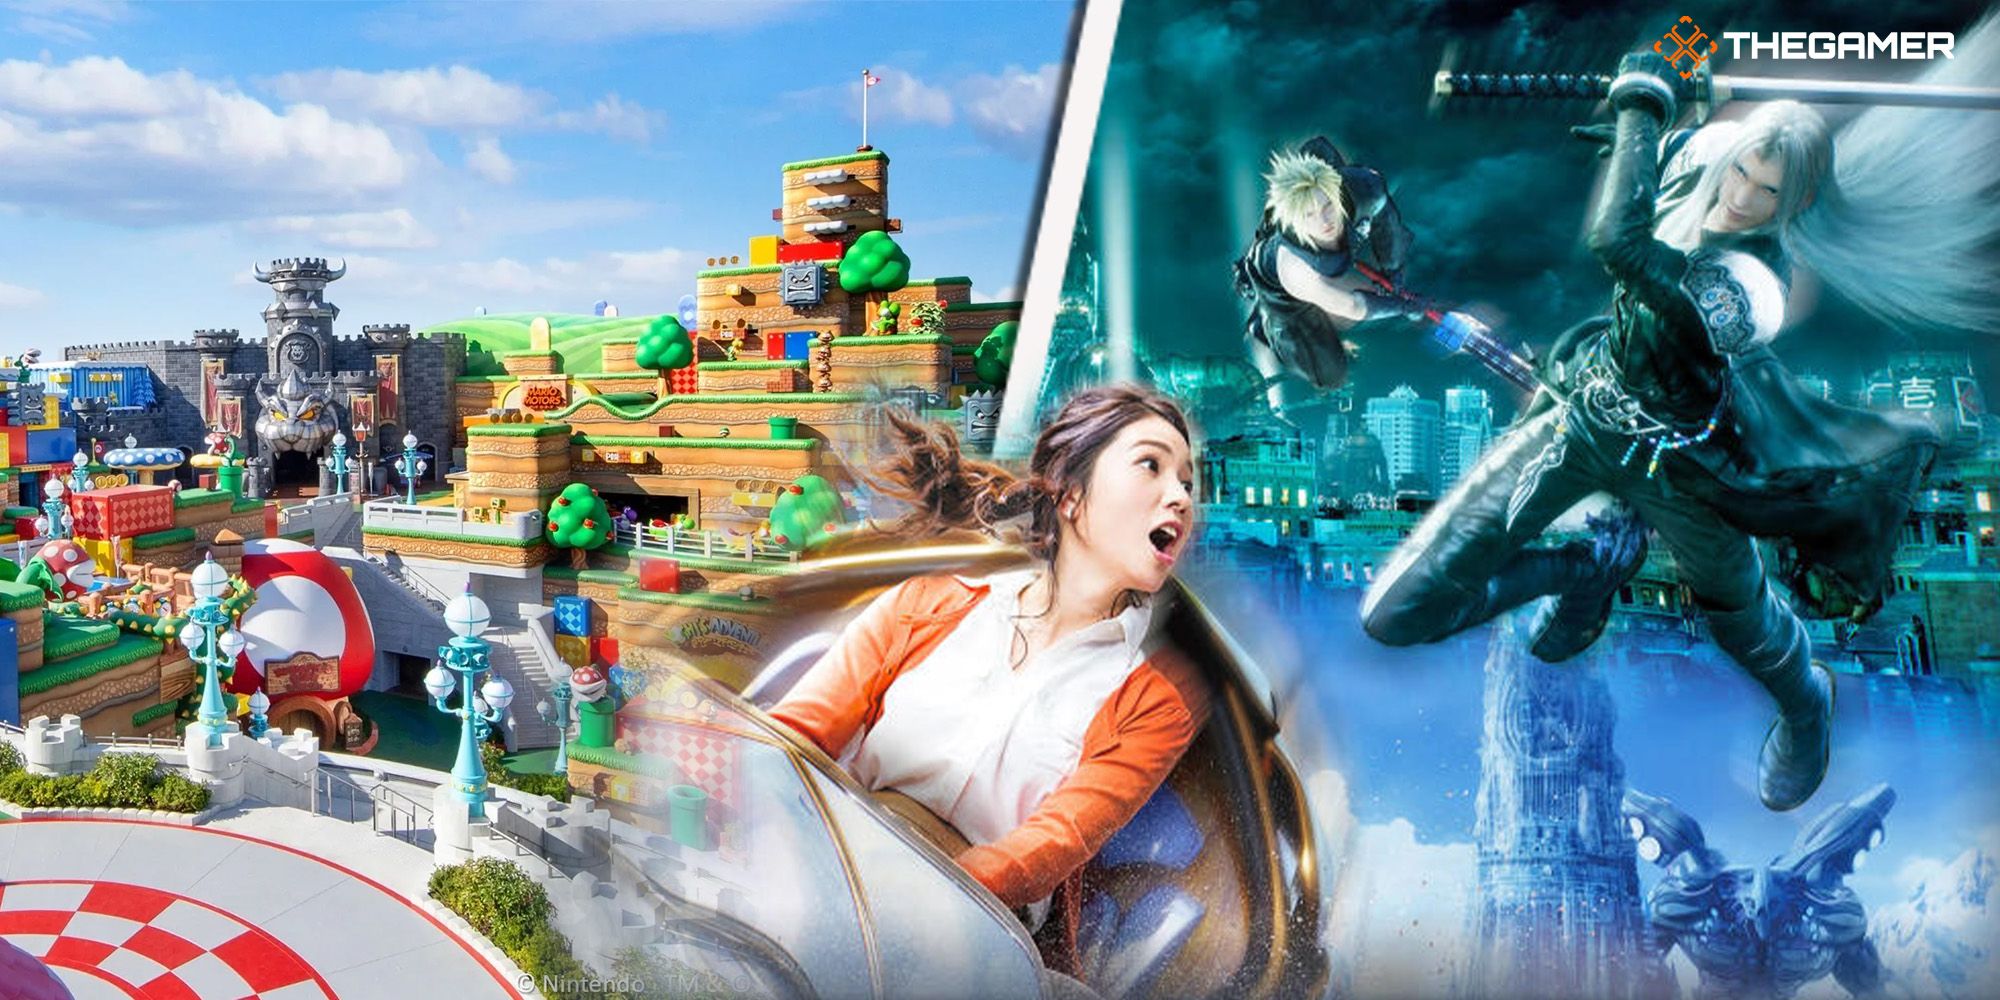 A woman rides a roller coaster overlooking Super Nintendo World while getting chased by Cloud and Sephiroth from Final Fantasy 7.